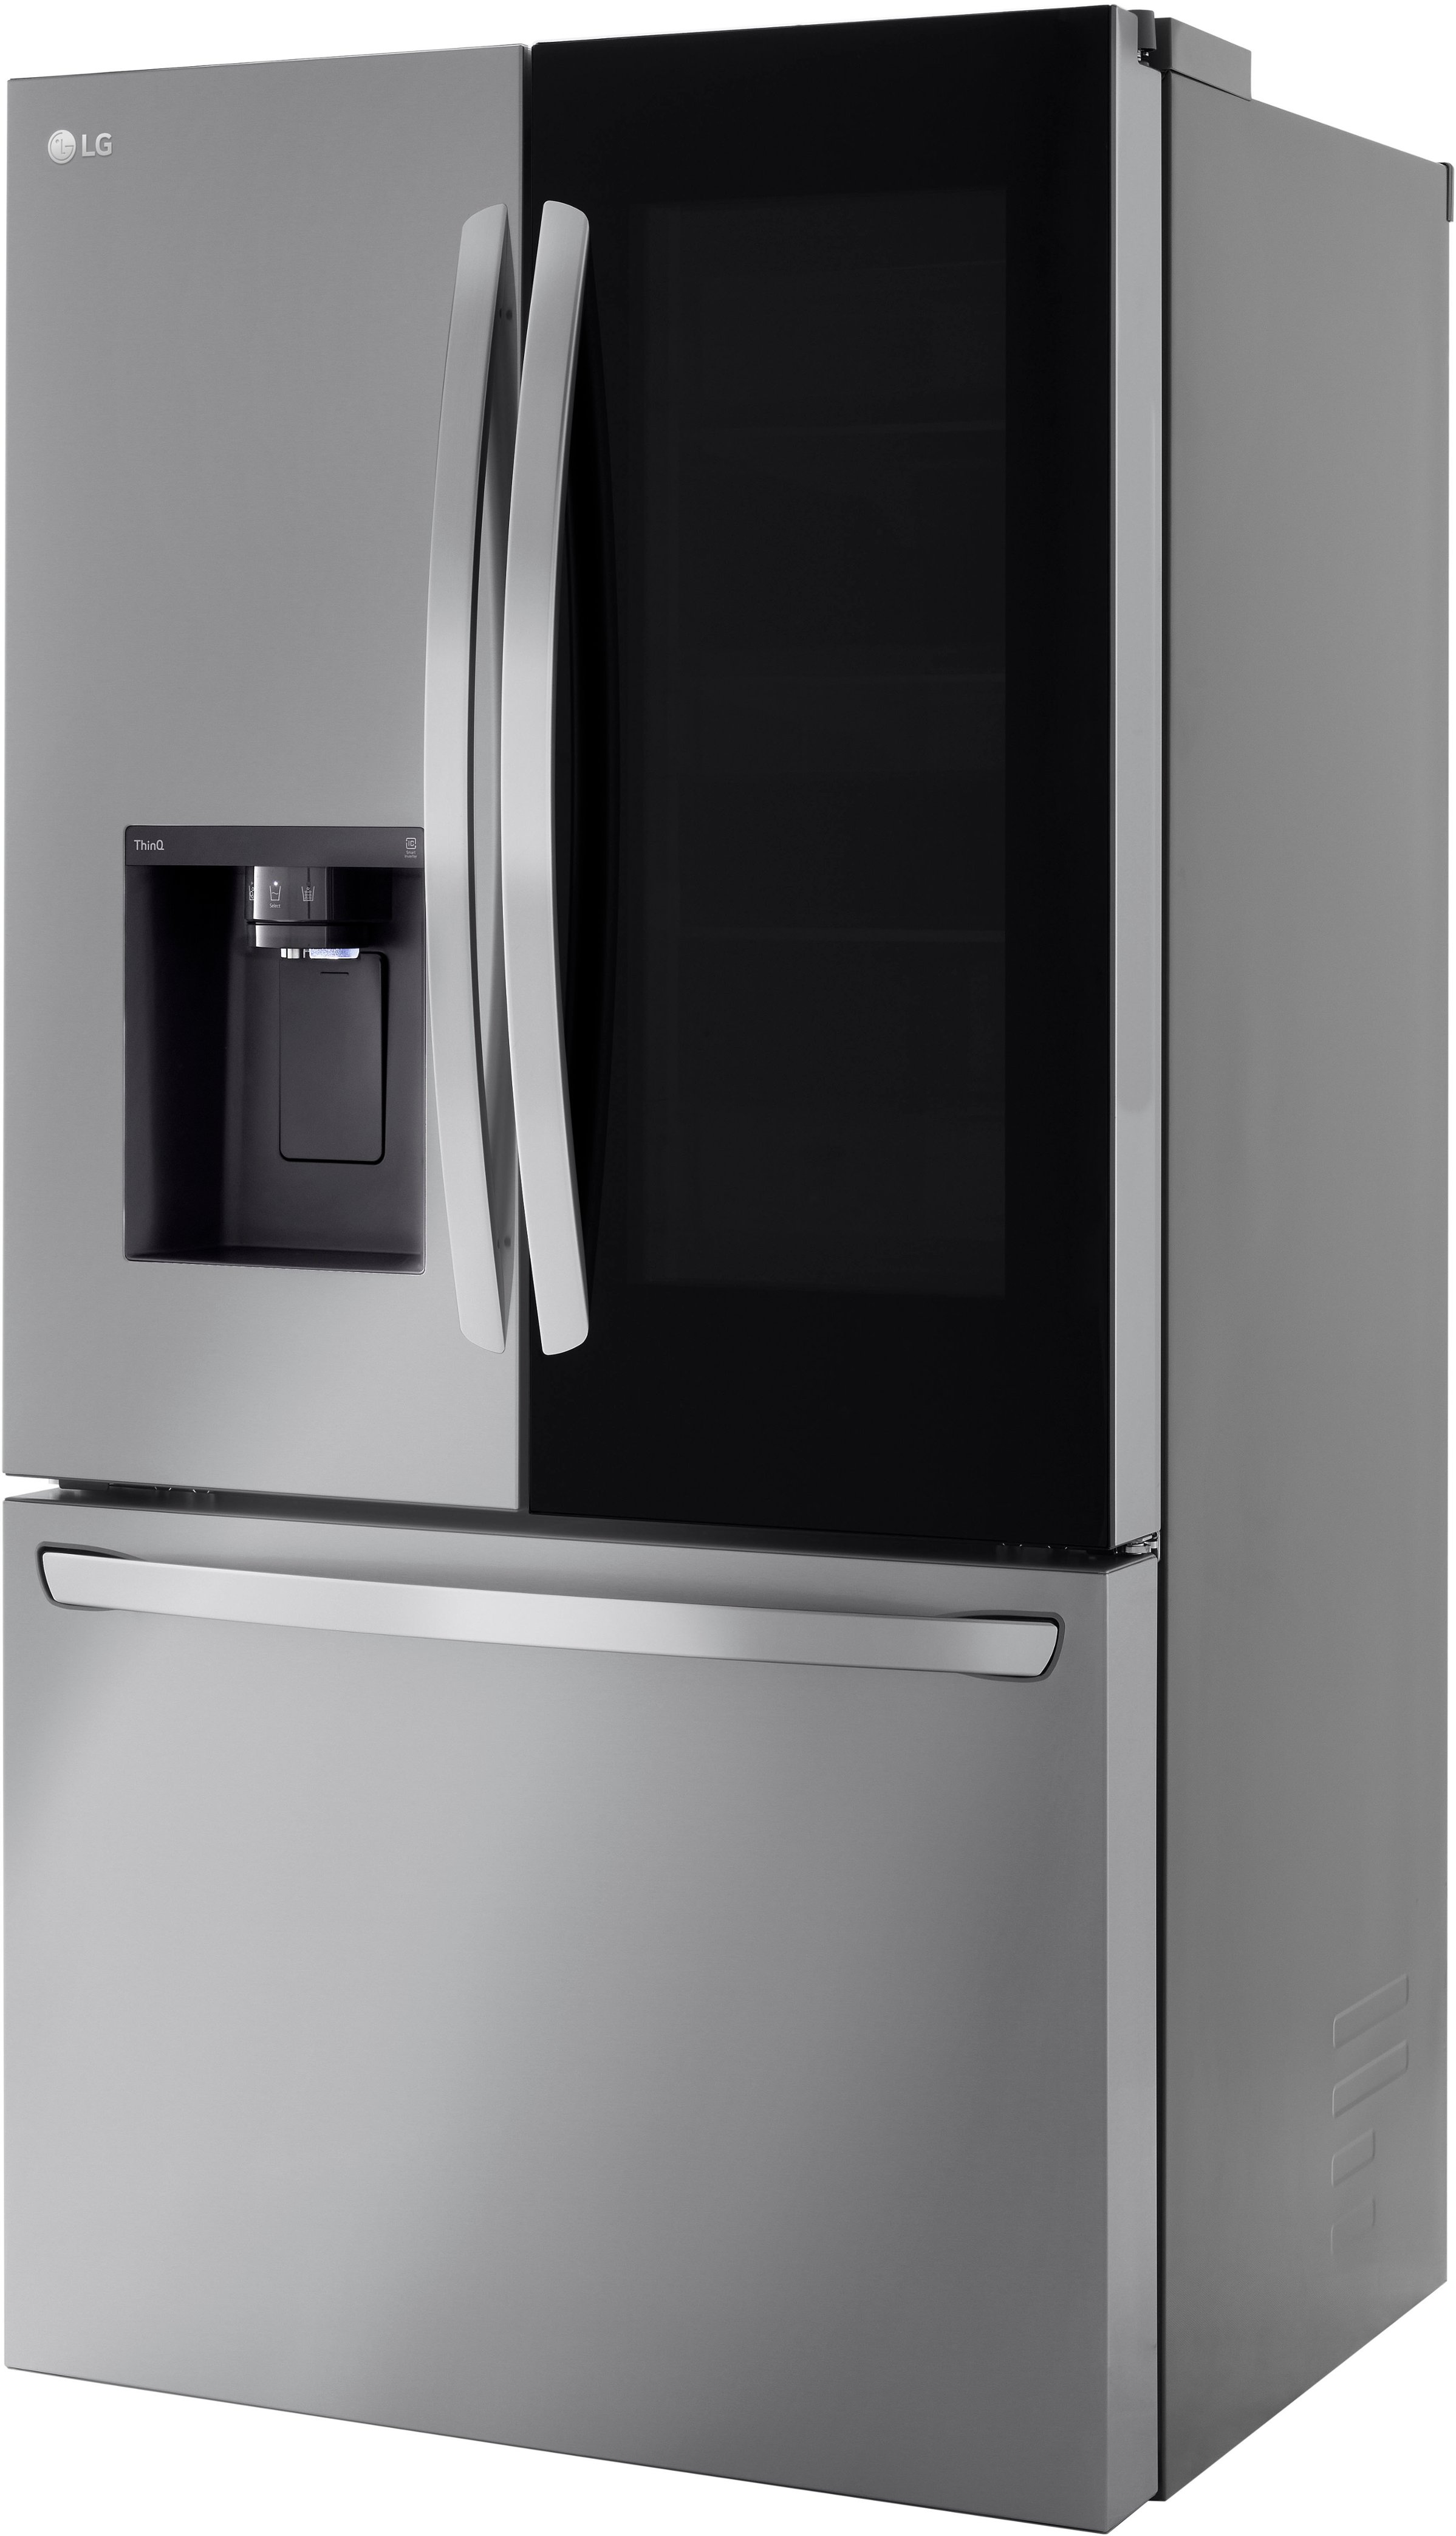 Lg 25 5 Cu Ft French Door Counter Depth Smart Refrigerator With Instaview Stainless Steel